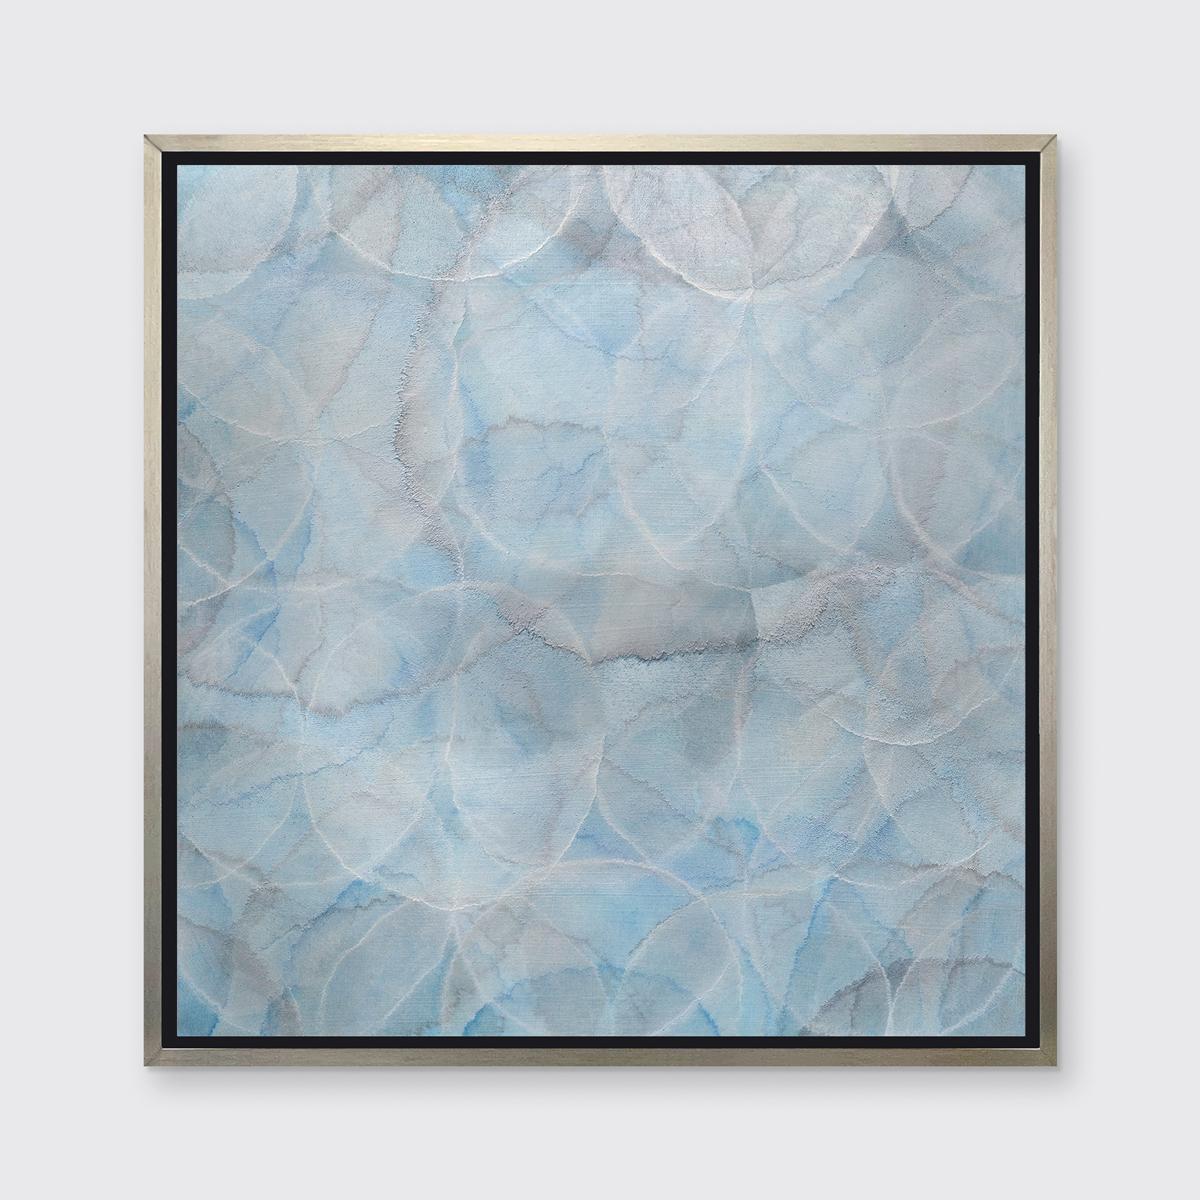 This abstract limited edition print by Roger Mudre features a cool blue, grey, and silver palette. The artist layers light outlines of circles over one another, which have an almost glowing aesthetic, which reaches out to all edges of the